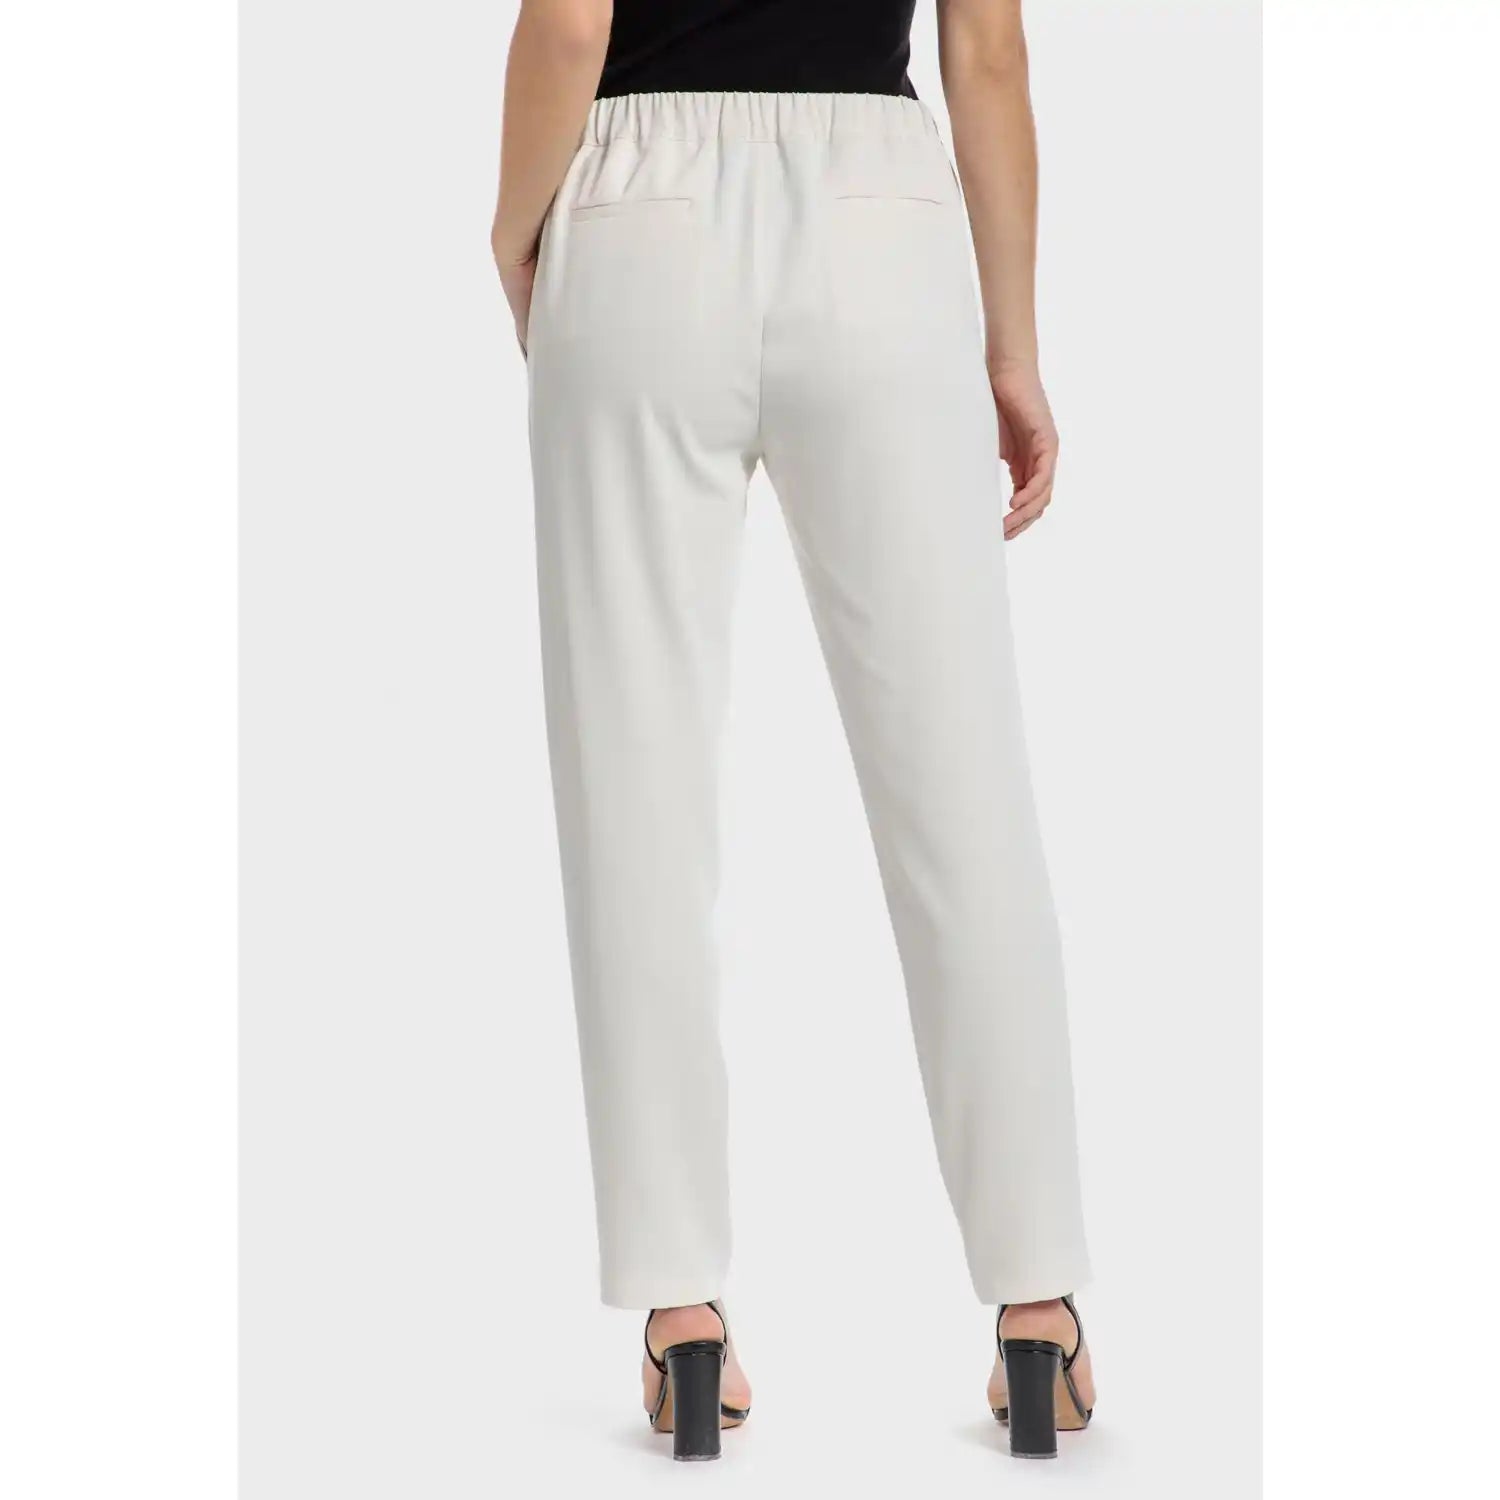 Punt Roma Crepe Trousers - White 2 Shaws Department Stores